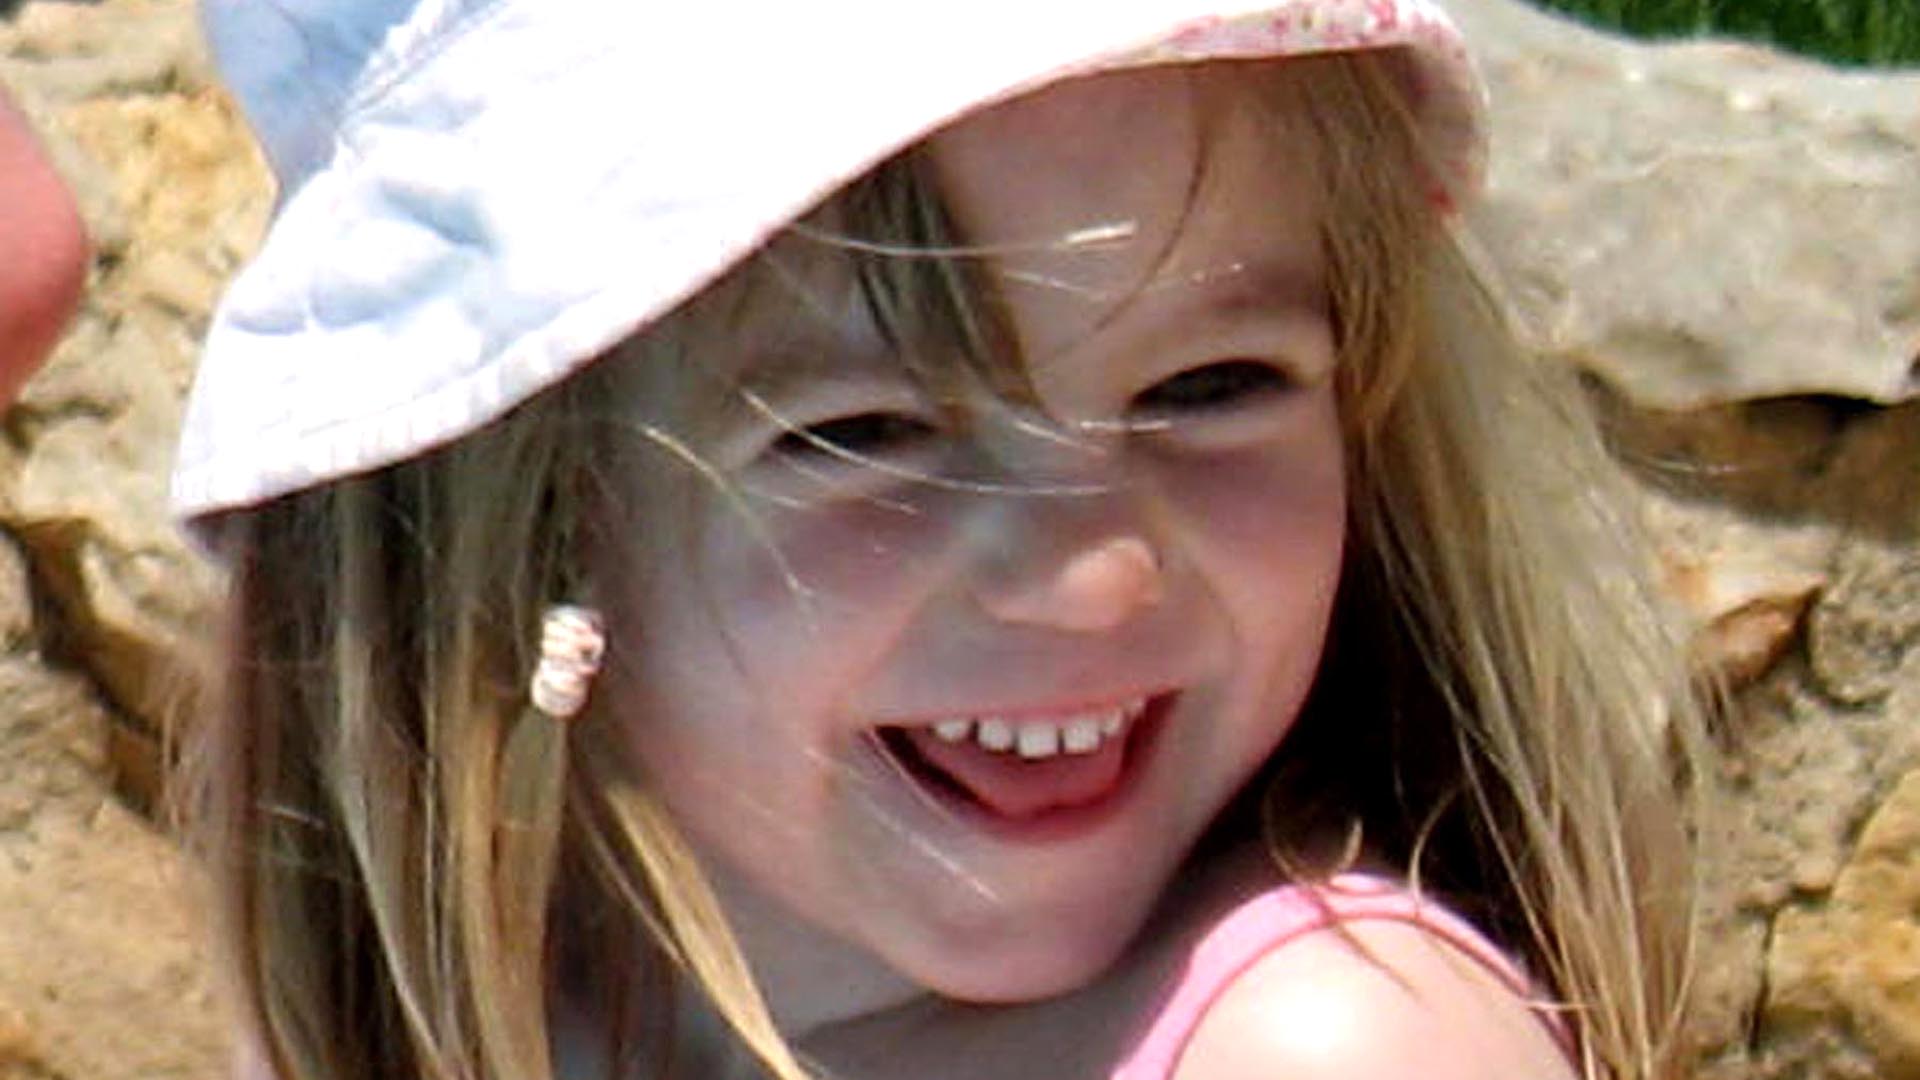 A photo released by the McCann family on May 24, 2007 shows Madeleine McCann on May 3, 2007, the same day she disappeared from the family's holiday apartment in the southern Algarve region.  AFP PHOTO/HO